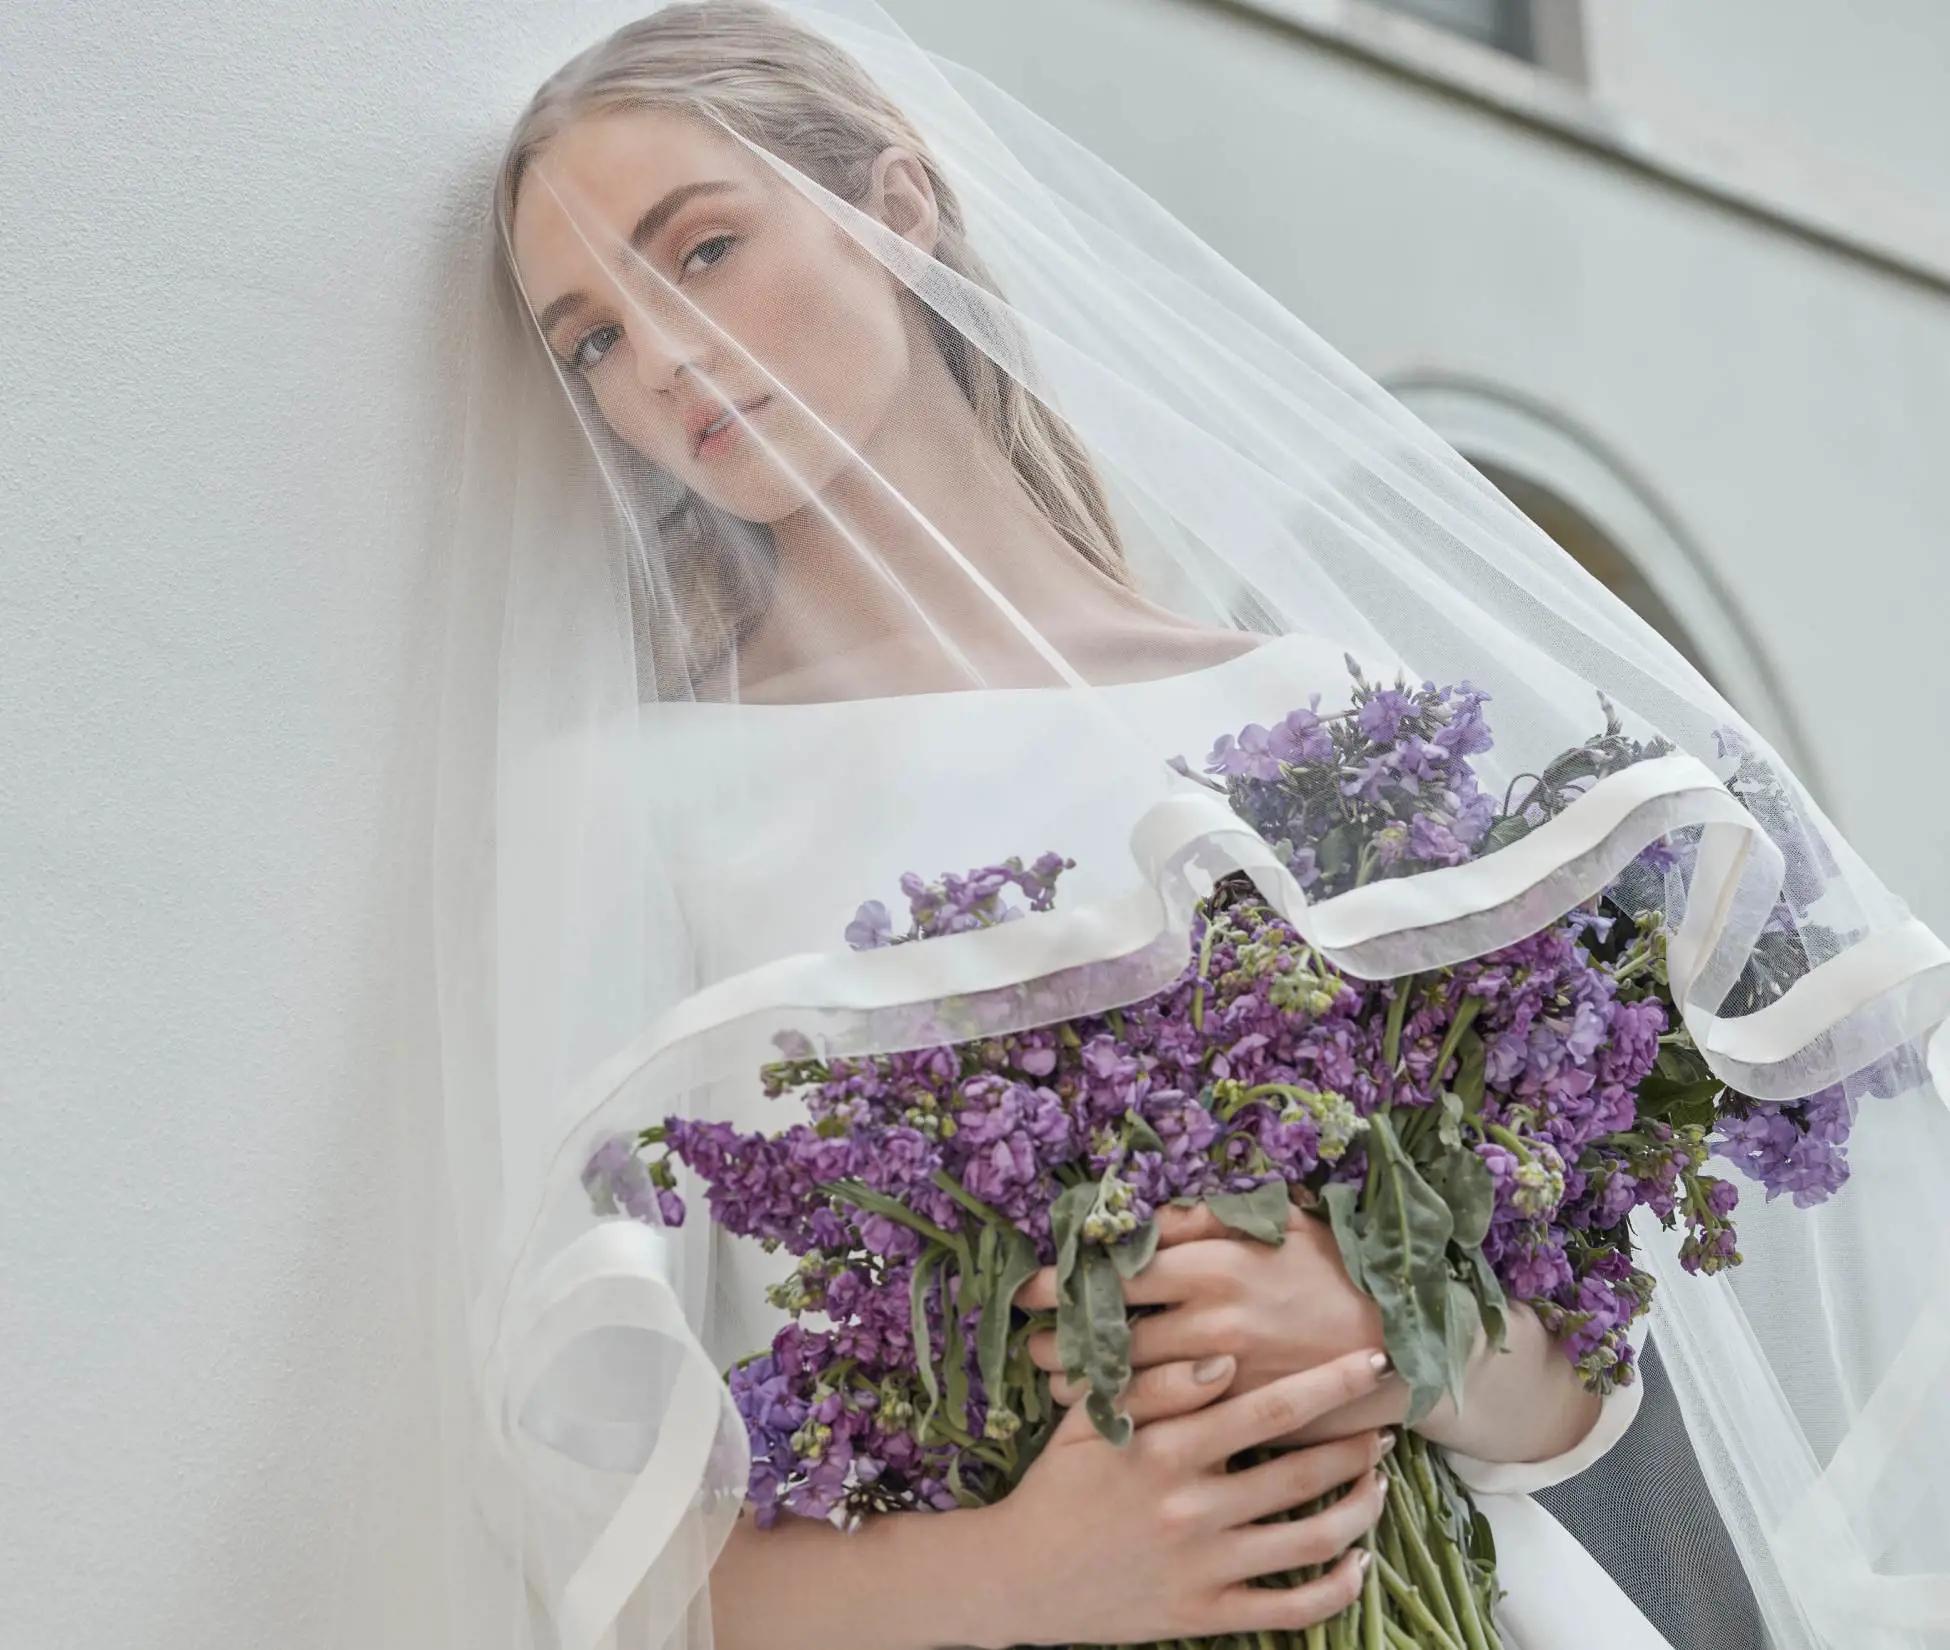 Bride with veil holding purple flowers wearing a gown from Sareh Nouri Fall 2022 collection